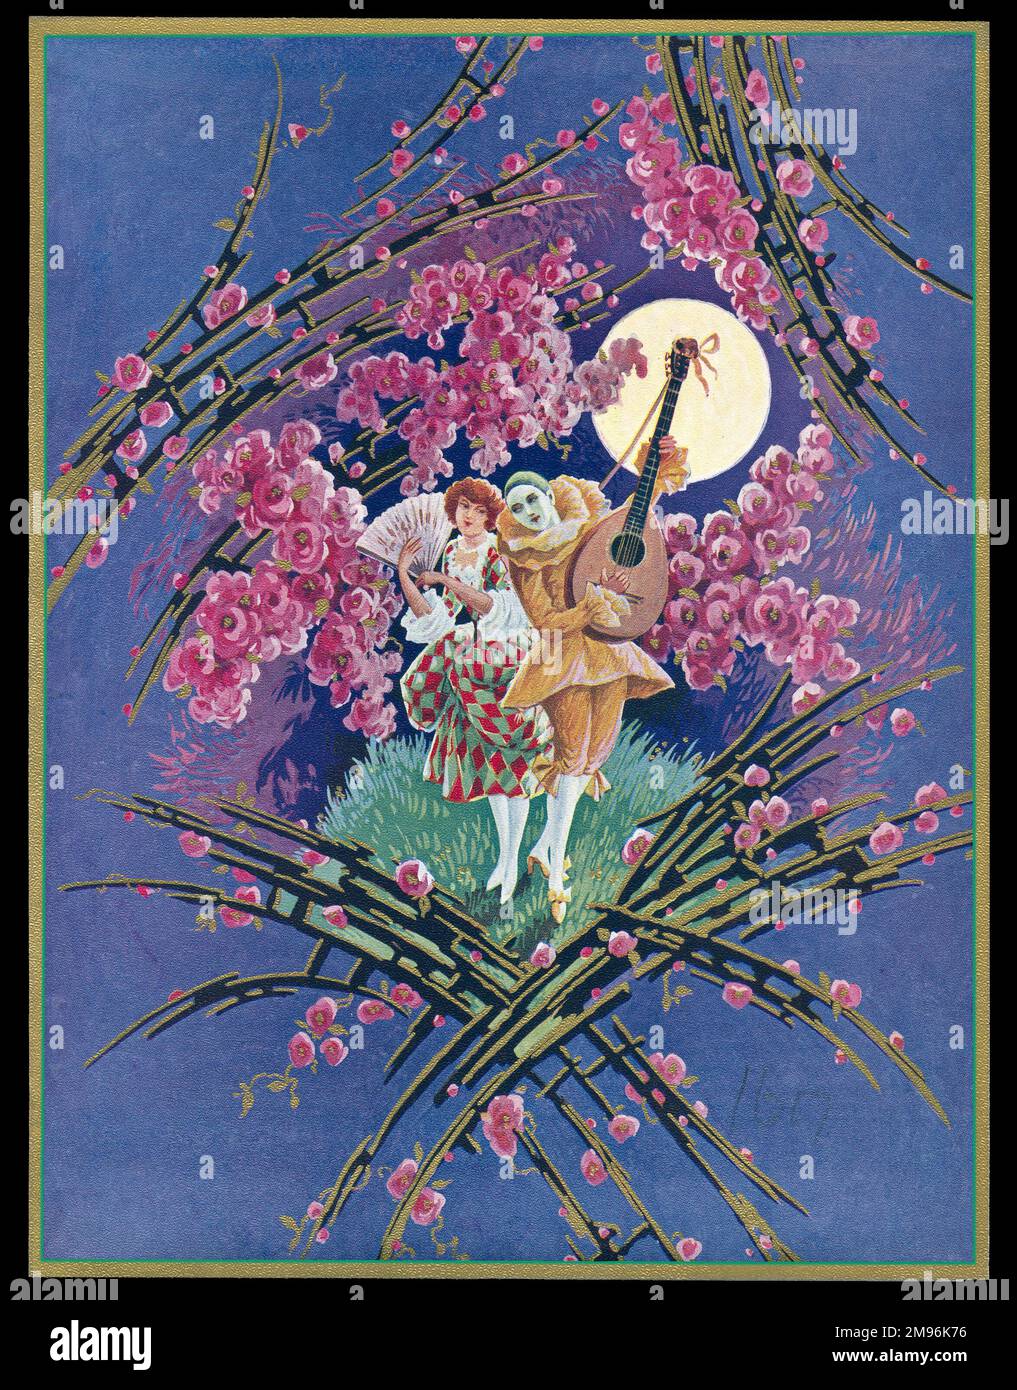 Chocolate box design, showing a pierrot serenading a female harlequin by the light of the moon, surrounded by pink flowers. Stock Photo